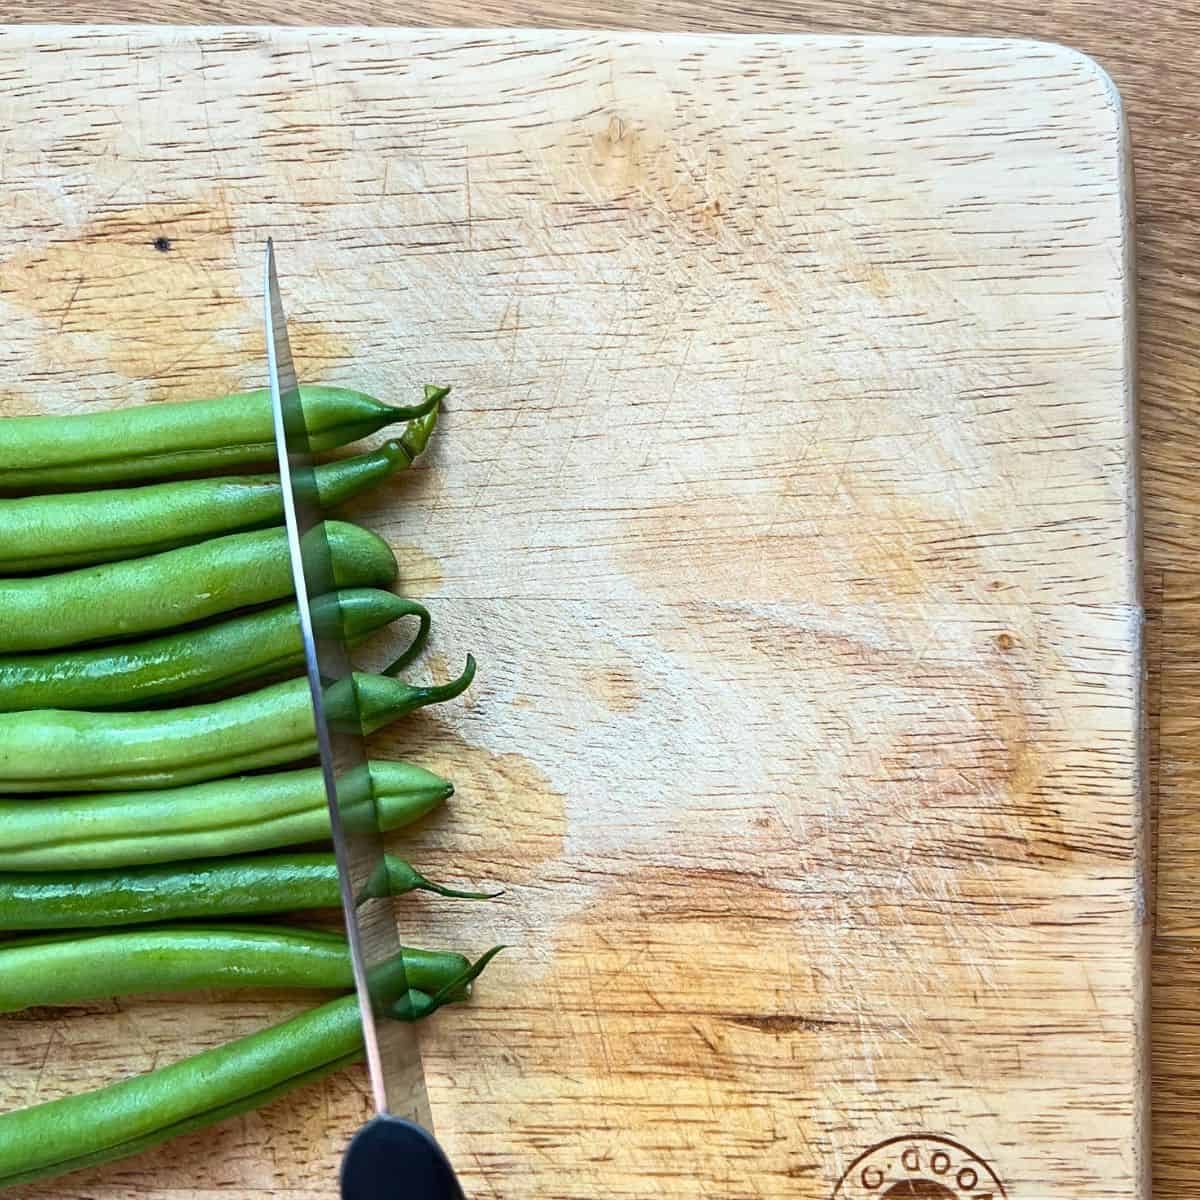 Trimming green beans on a chopping board.